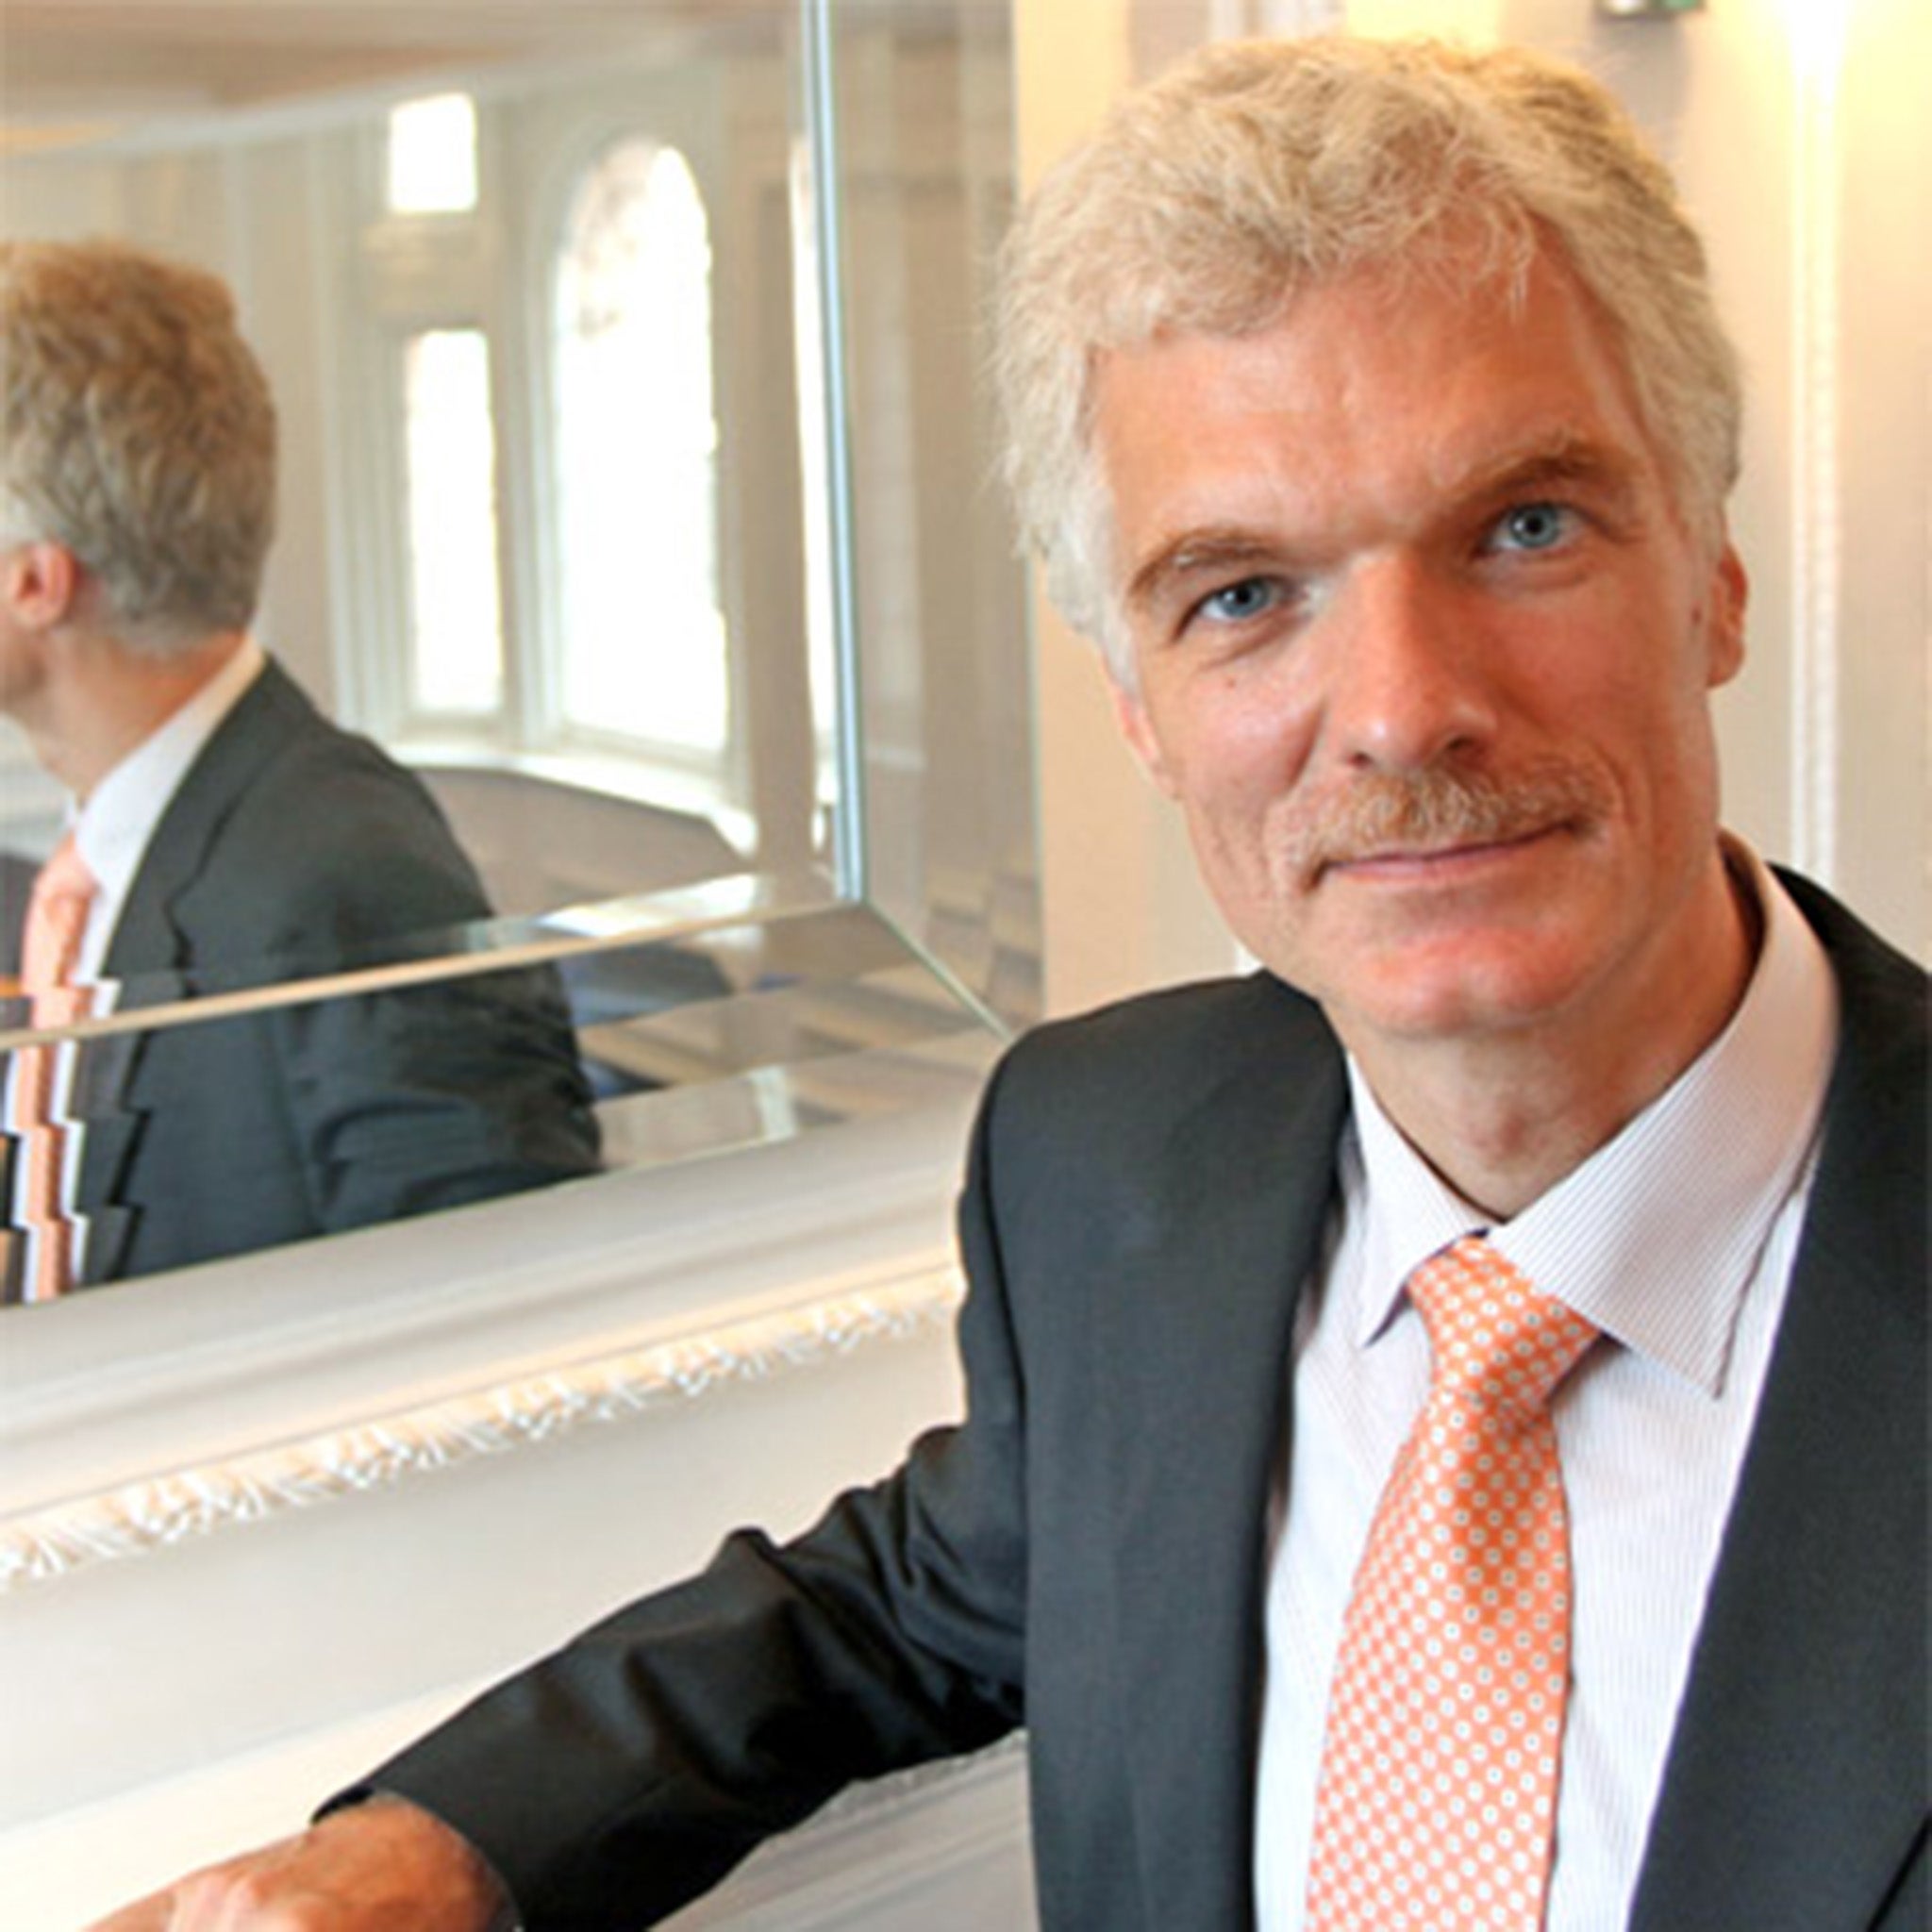 Andreas Schleicher, head of education at the OECD